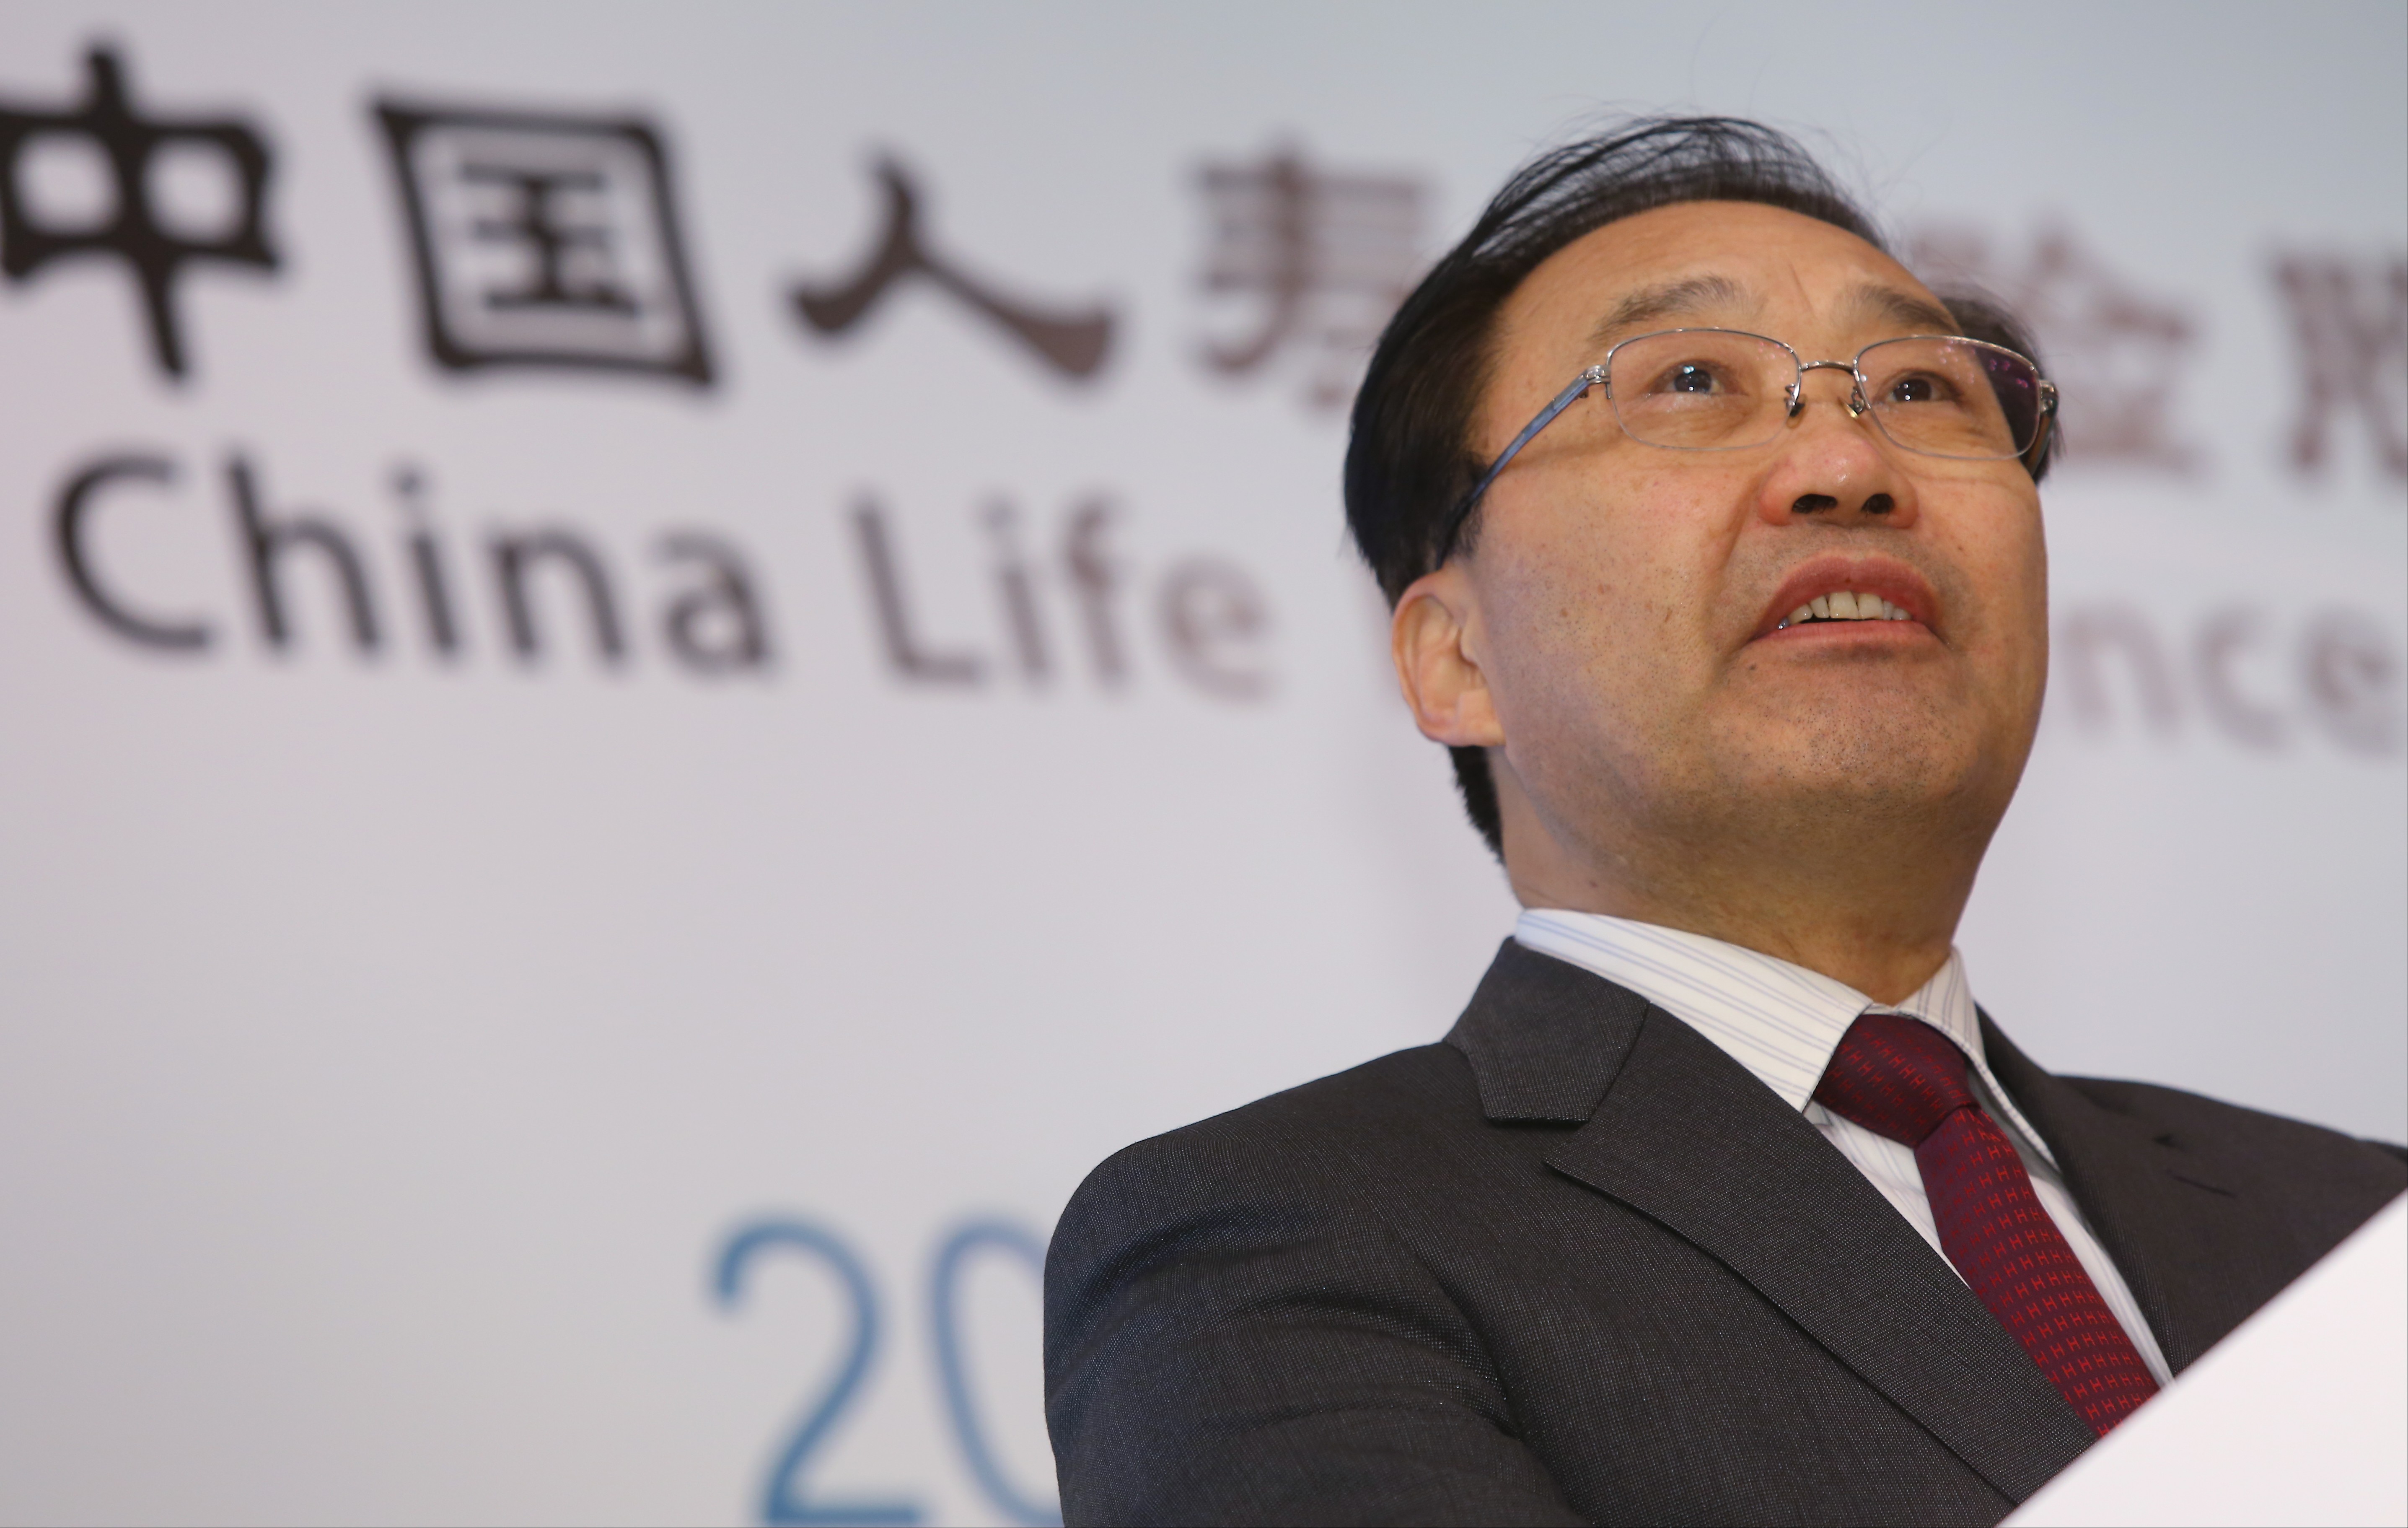 China Life Insurance Chairman Yang Mingsheng attending the firm’s annual results at Island Shangri-La Hotel in Admiralty in 2016. Photo: Edmond So